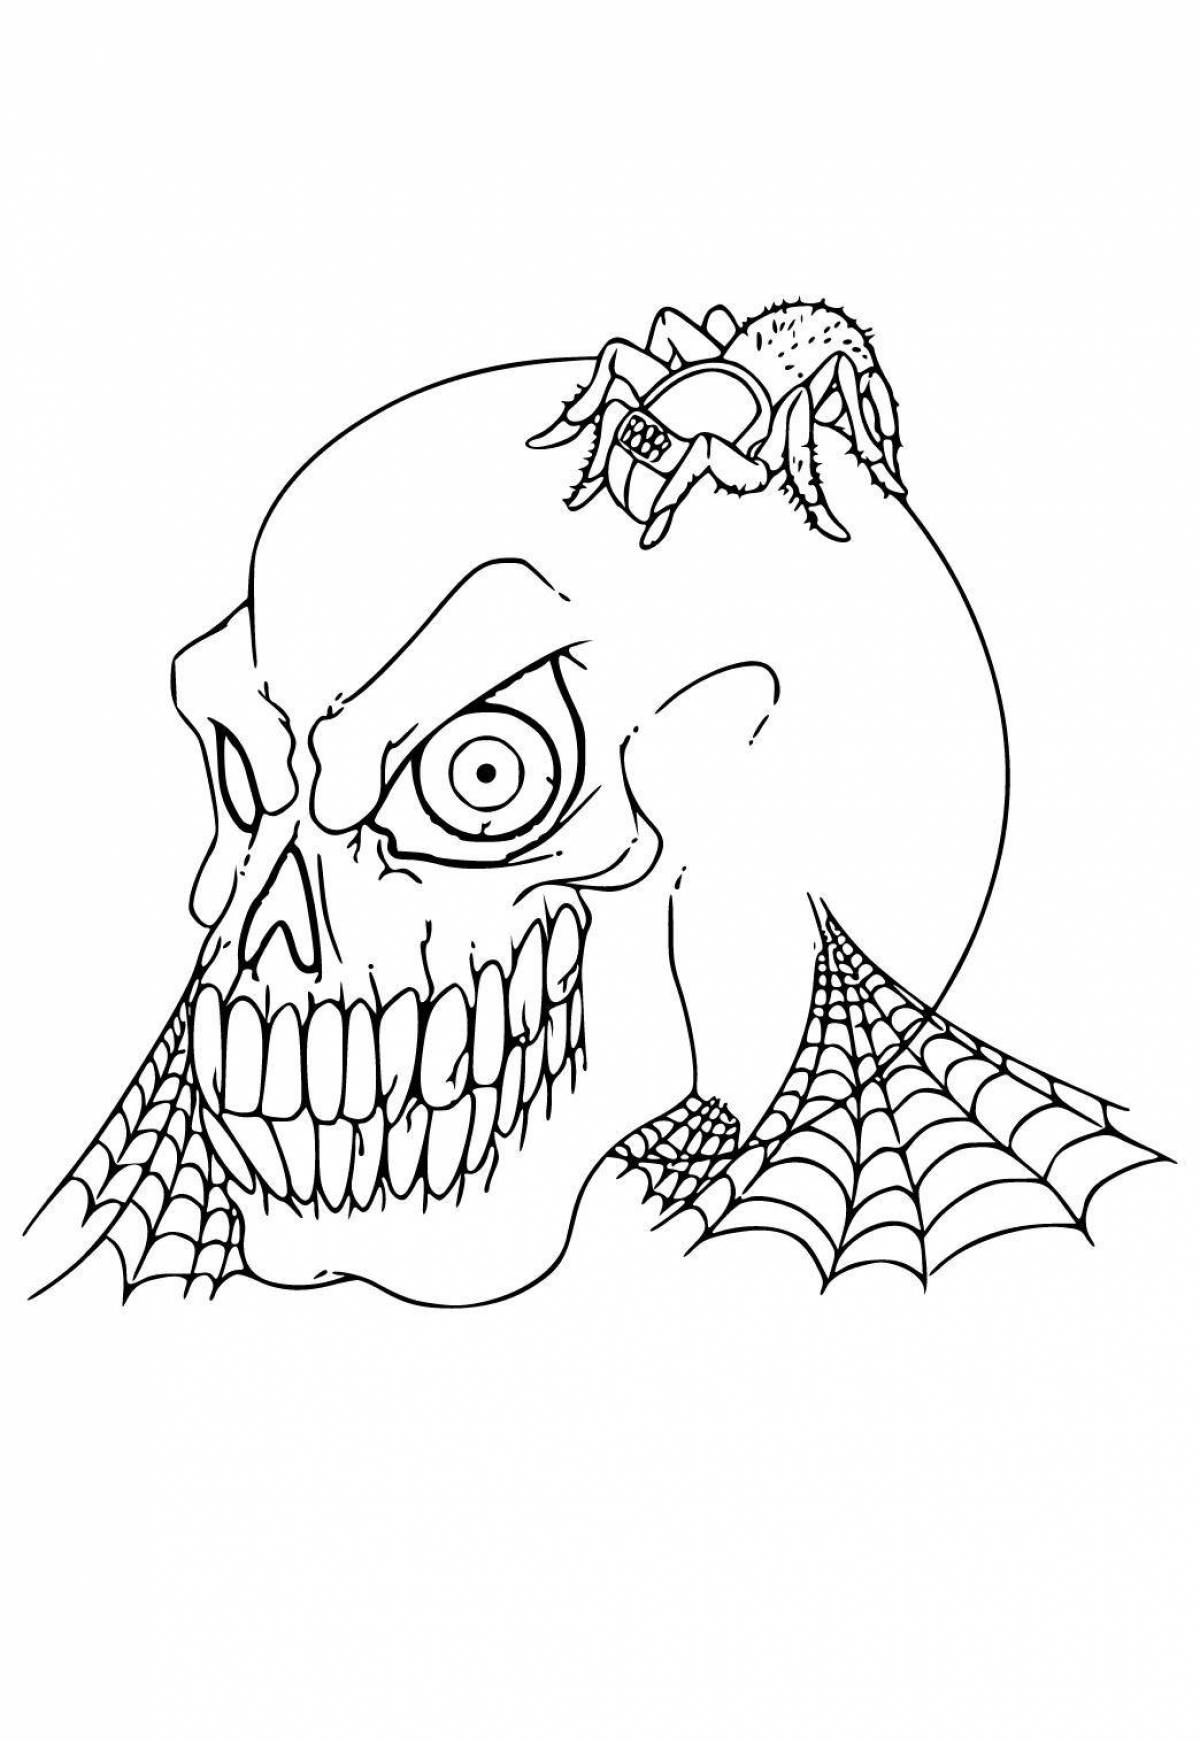 Amazing horror movie coloring pages